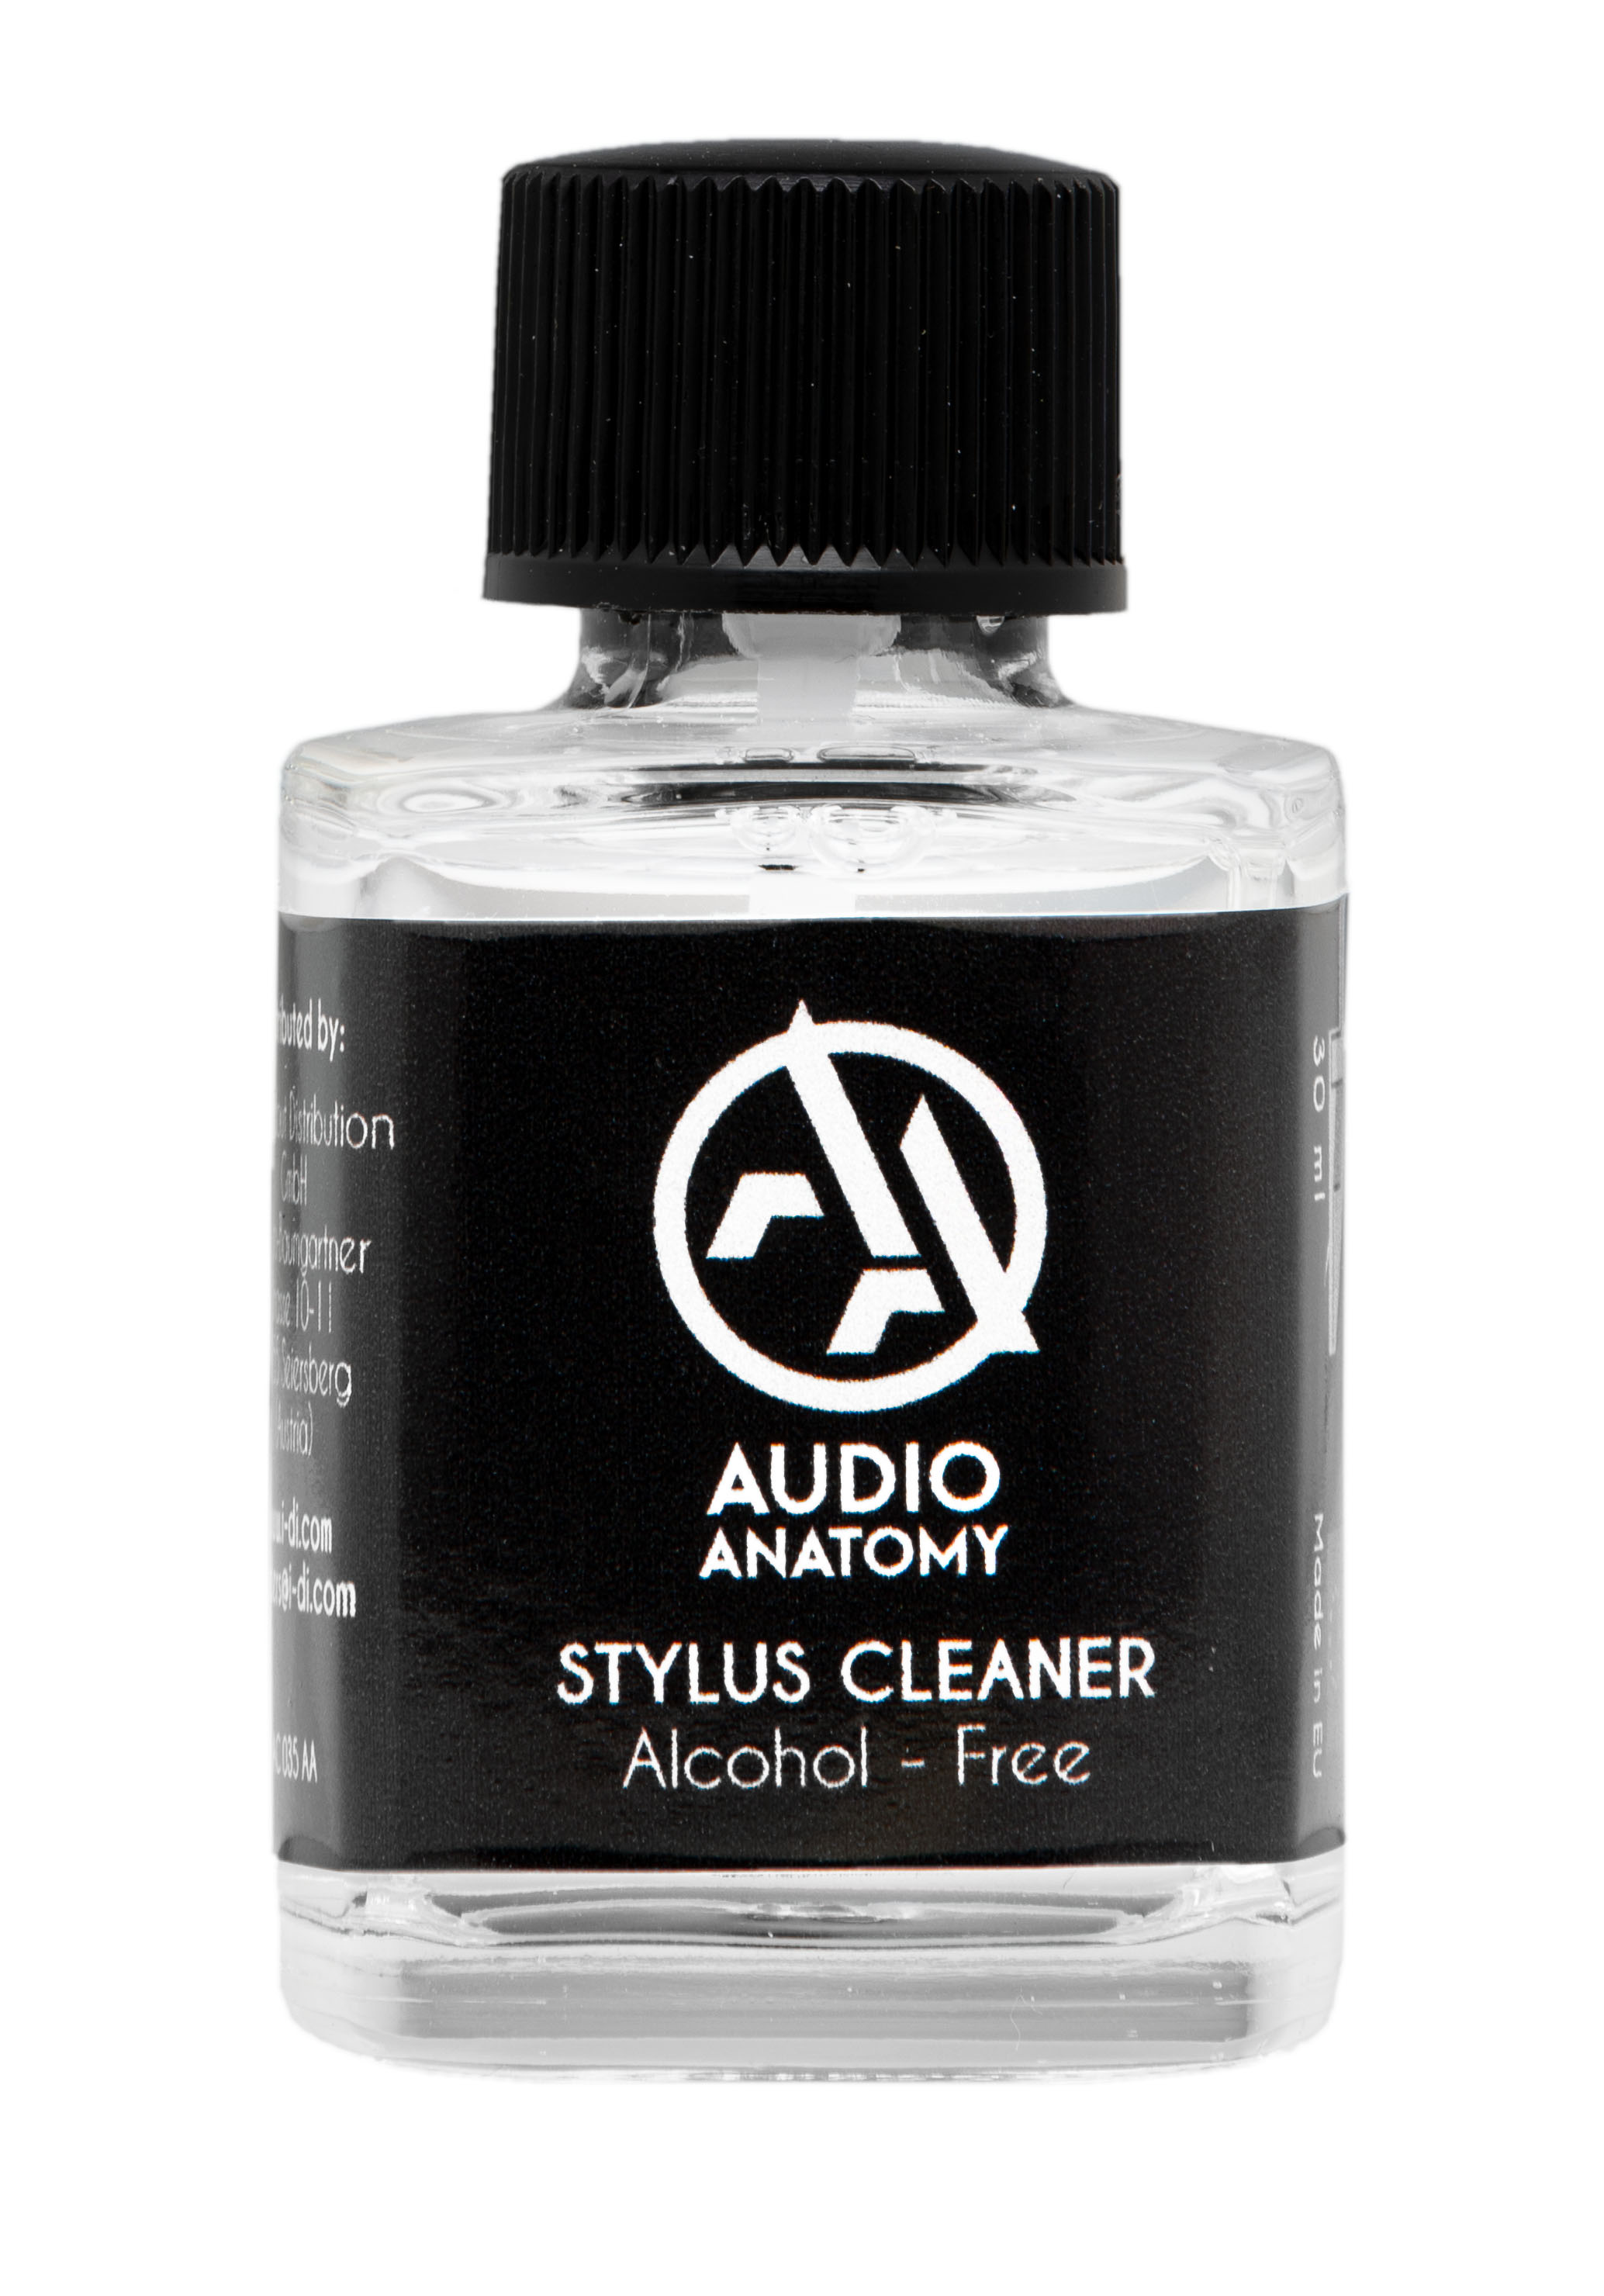 STYLUS CLEANER WITH SOFT BRUSH - ALCOHOL FREE - 30ML KIT